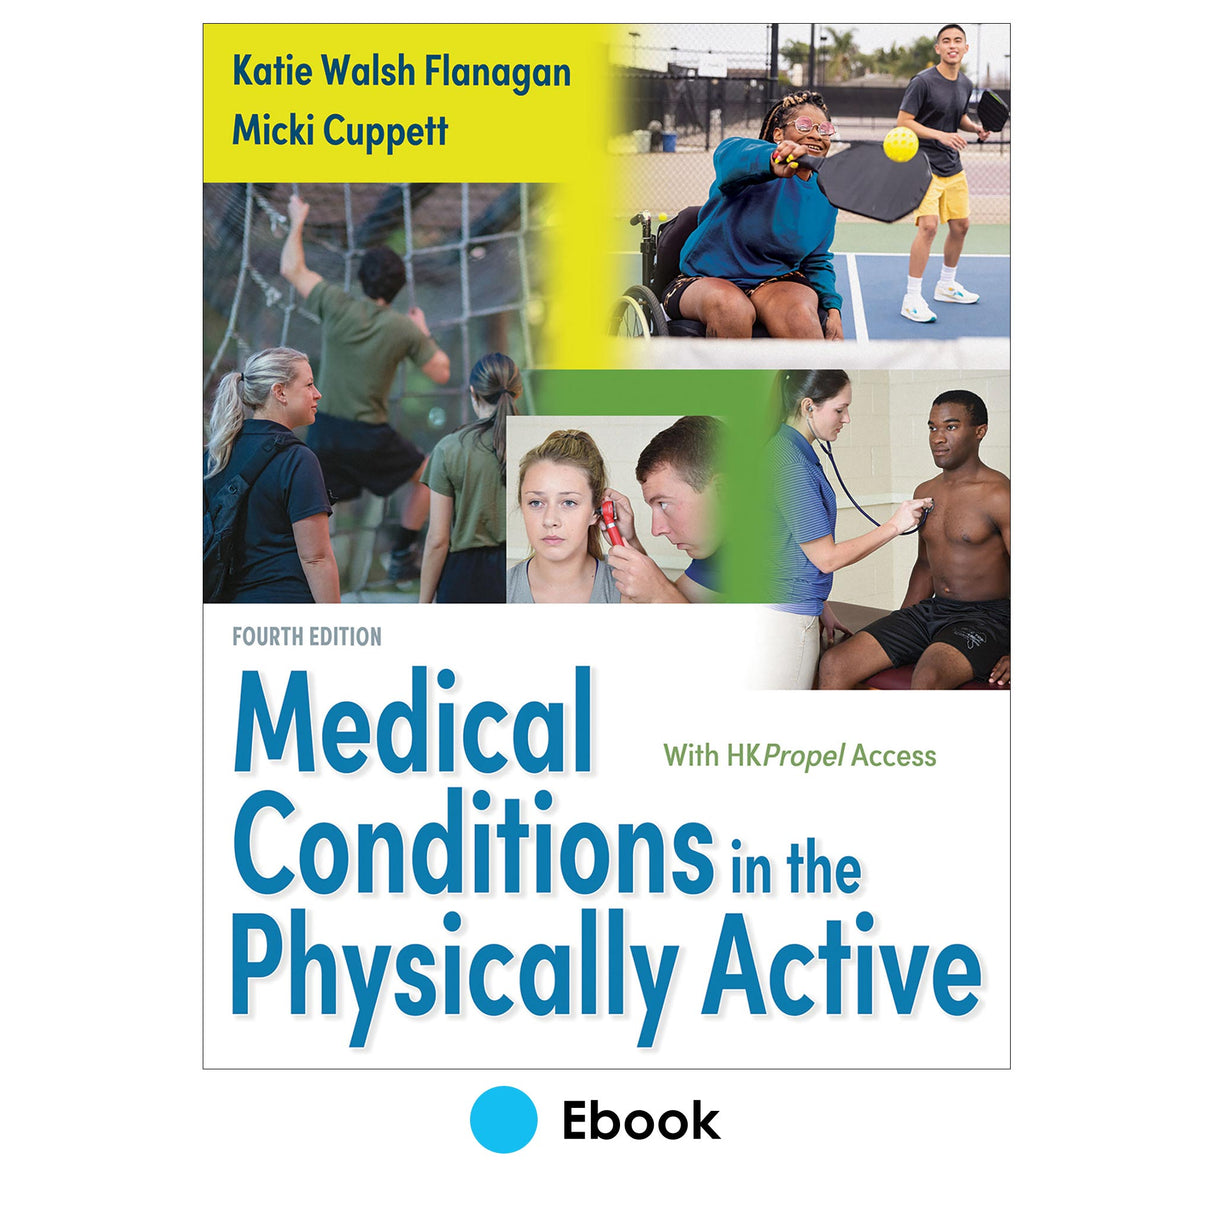 Medical Conditions in the Physically Active 4th Edition Ebook With HKPropel Access